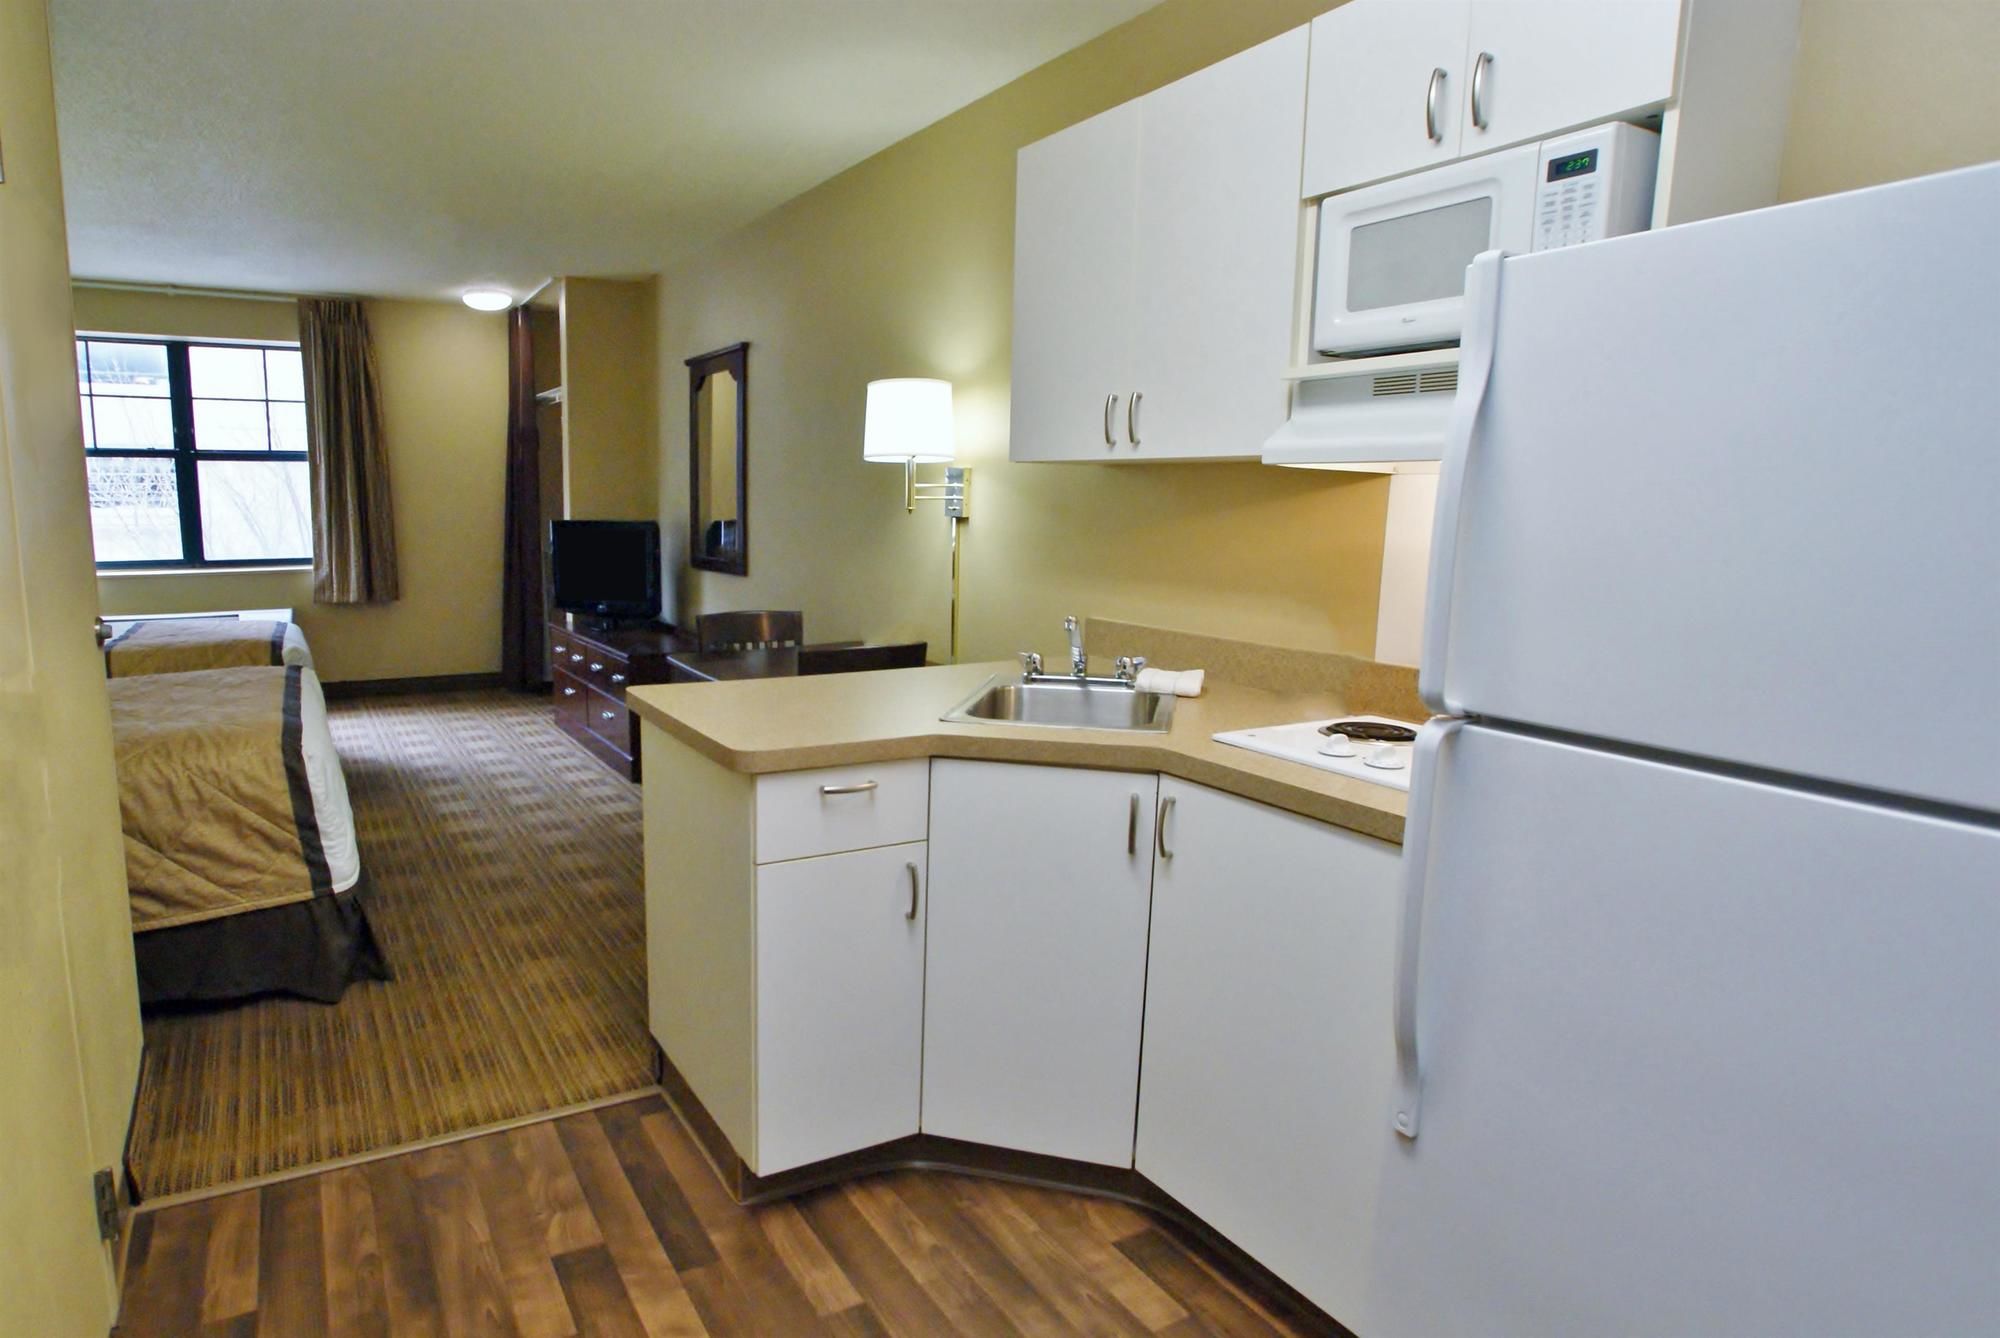 Extended Stay America Los Angeles San Dimas